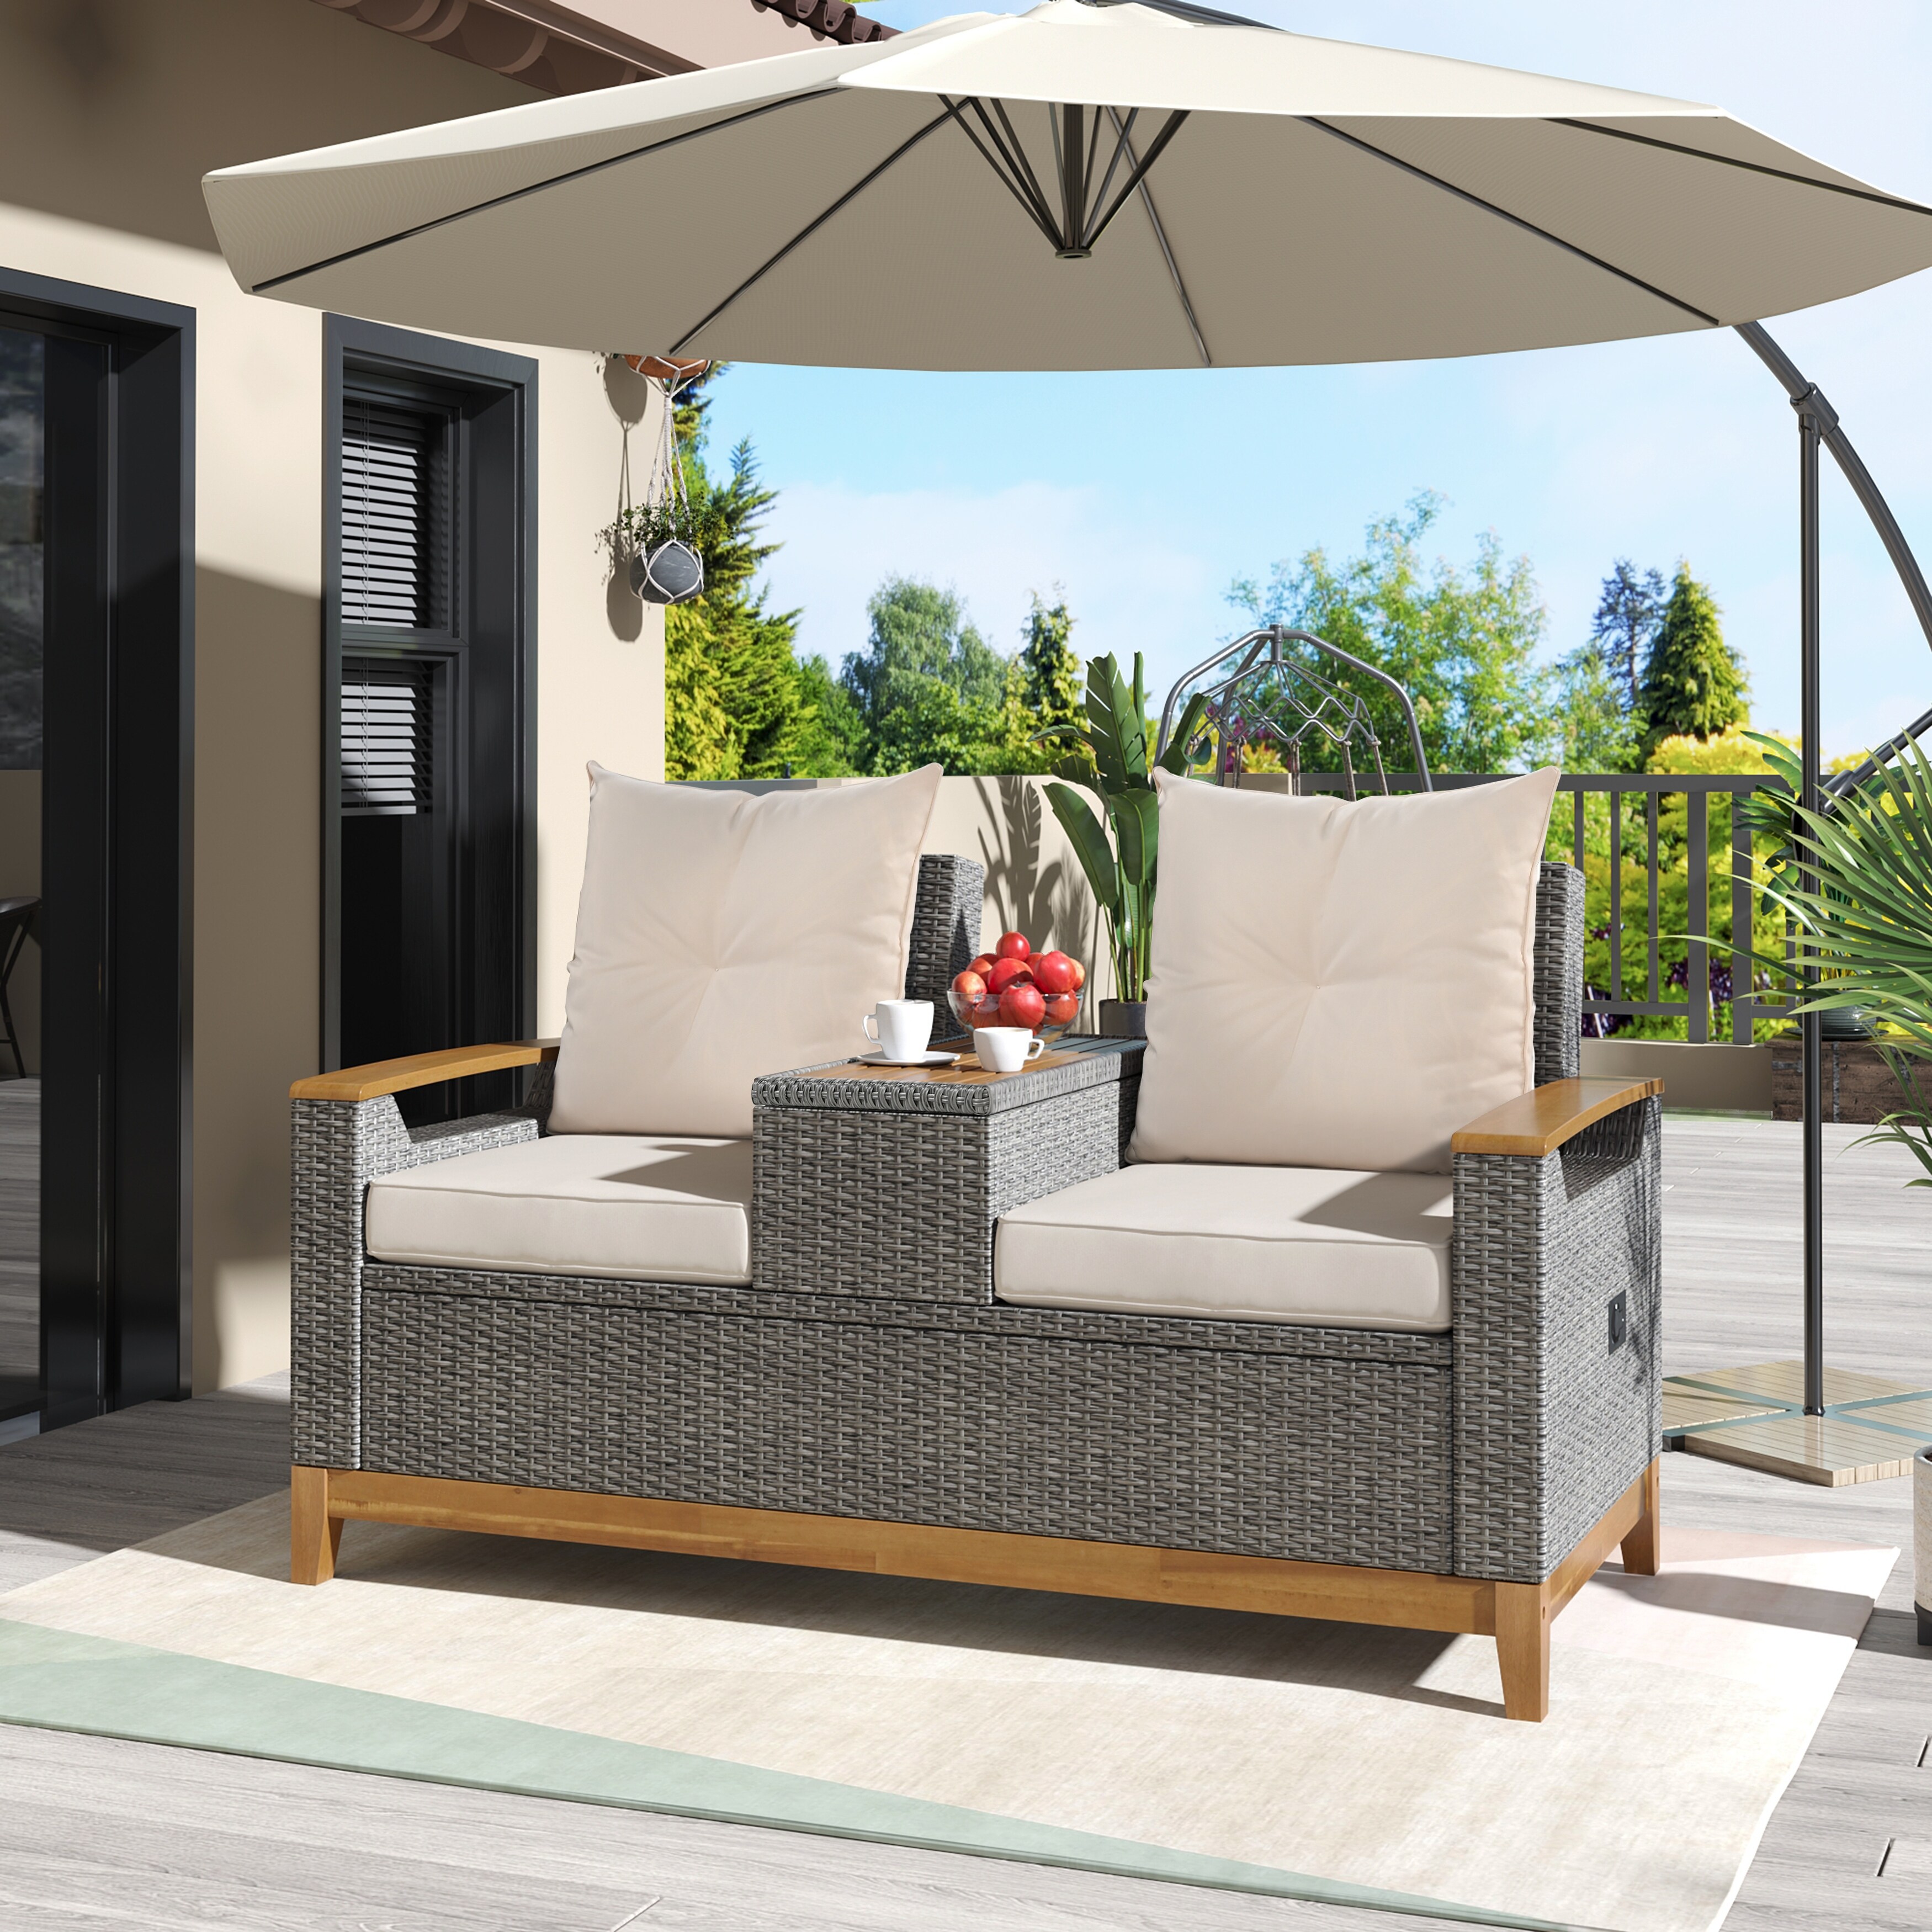 Outdoor Comfort Adjustable Loveseat  Armrest With Storage Space  Suitable For Courtyards/ Swimming Pools And Balconies